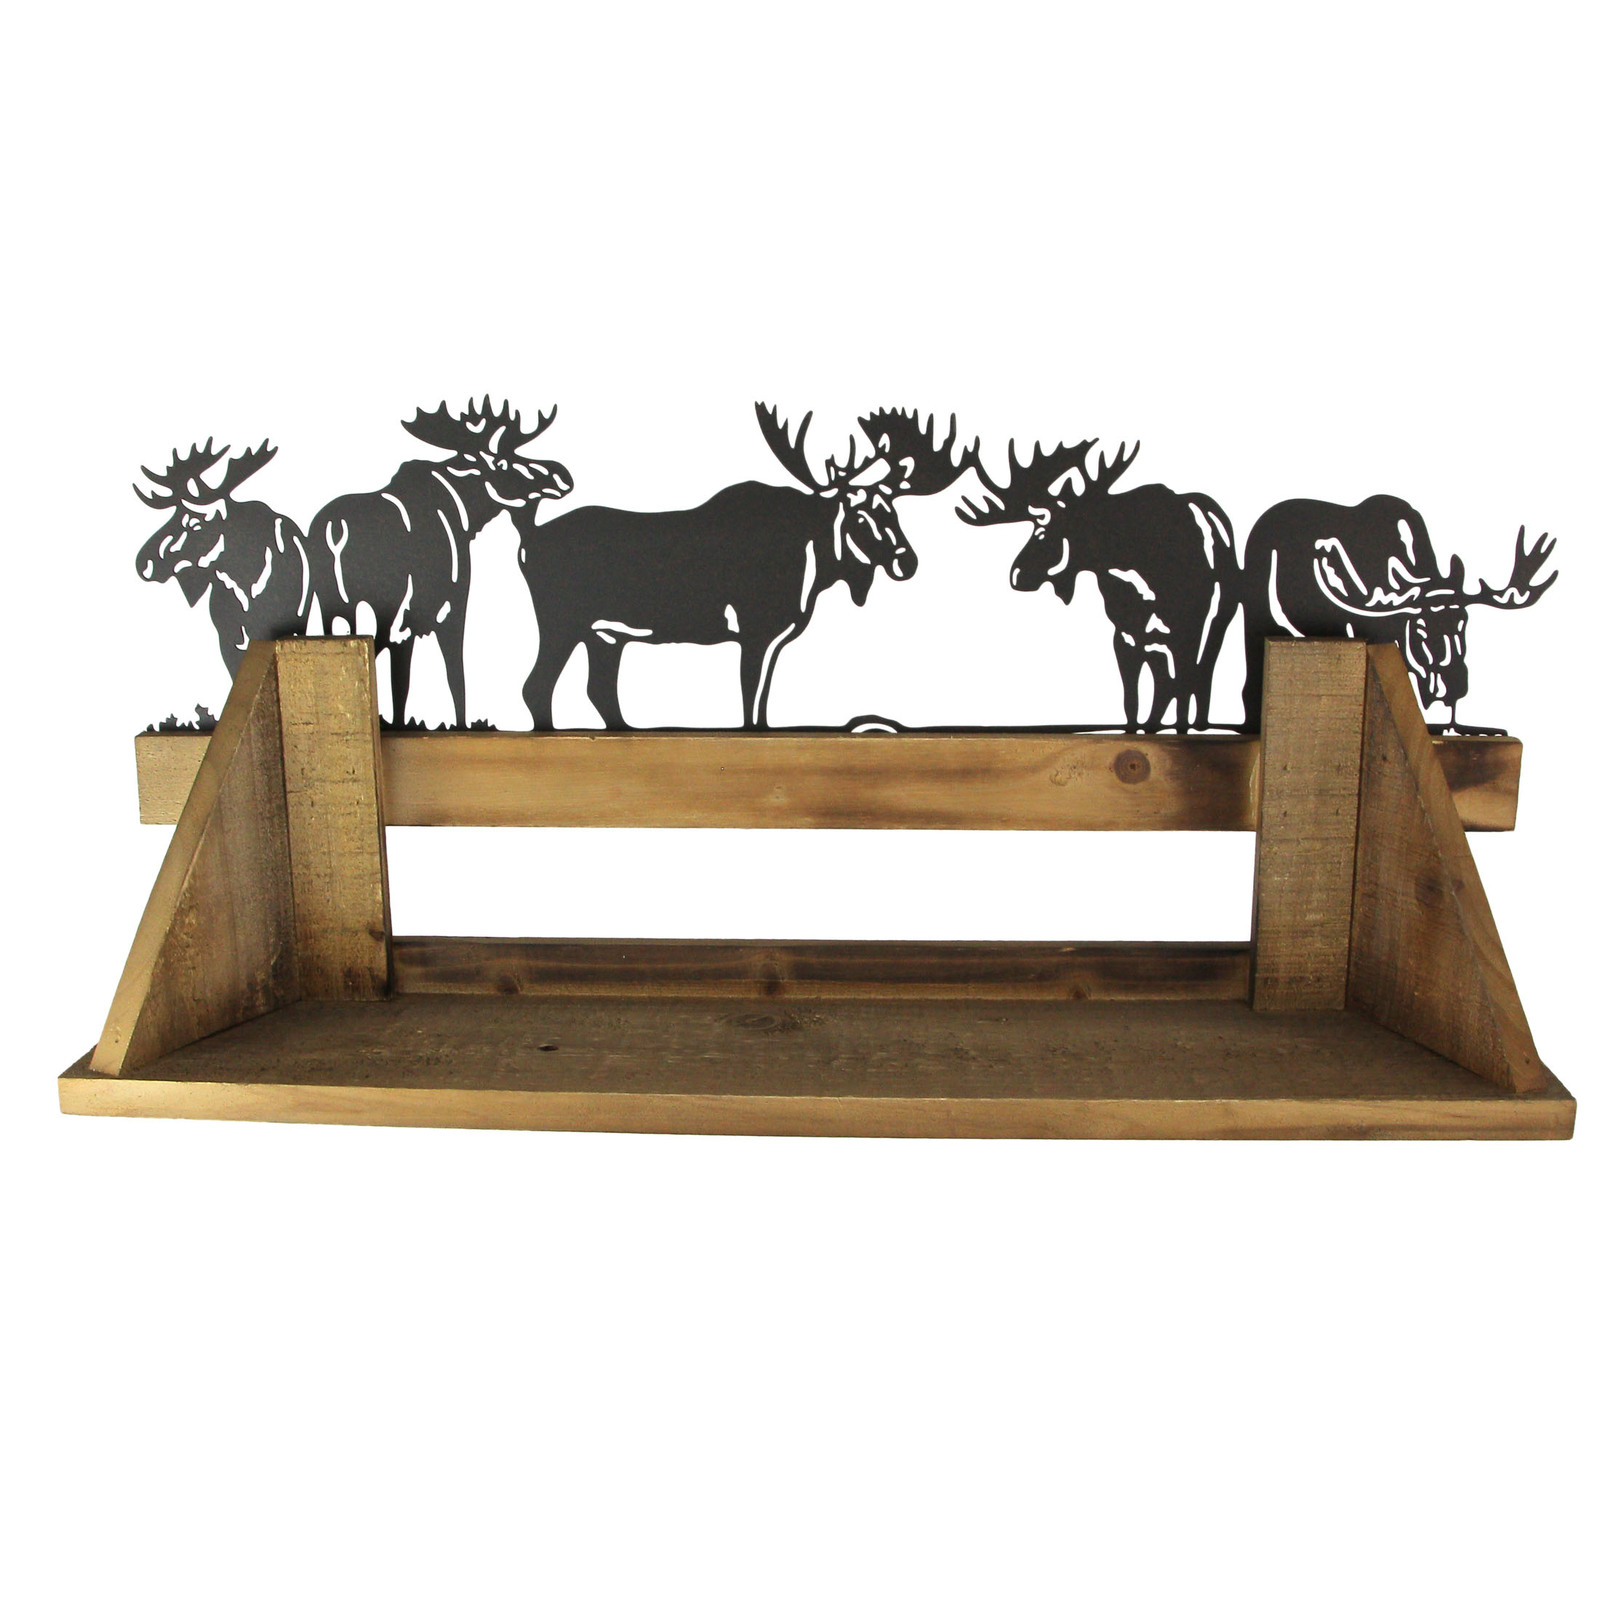 Primary image for Rustic Wood Metal Moose Decorative Floating Shelf Wall Mounted Home Lodge Decor